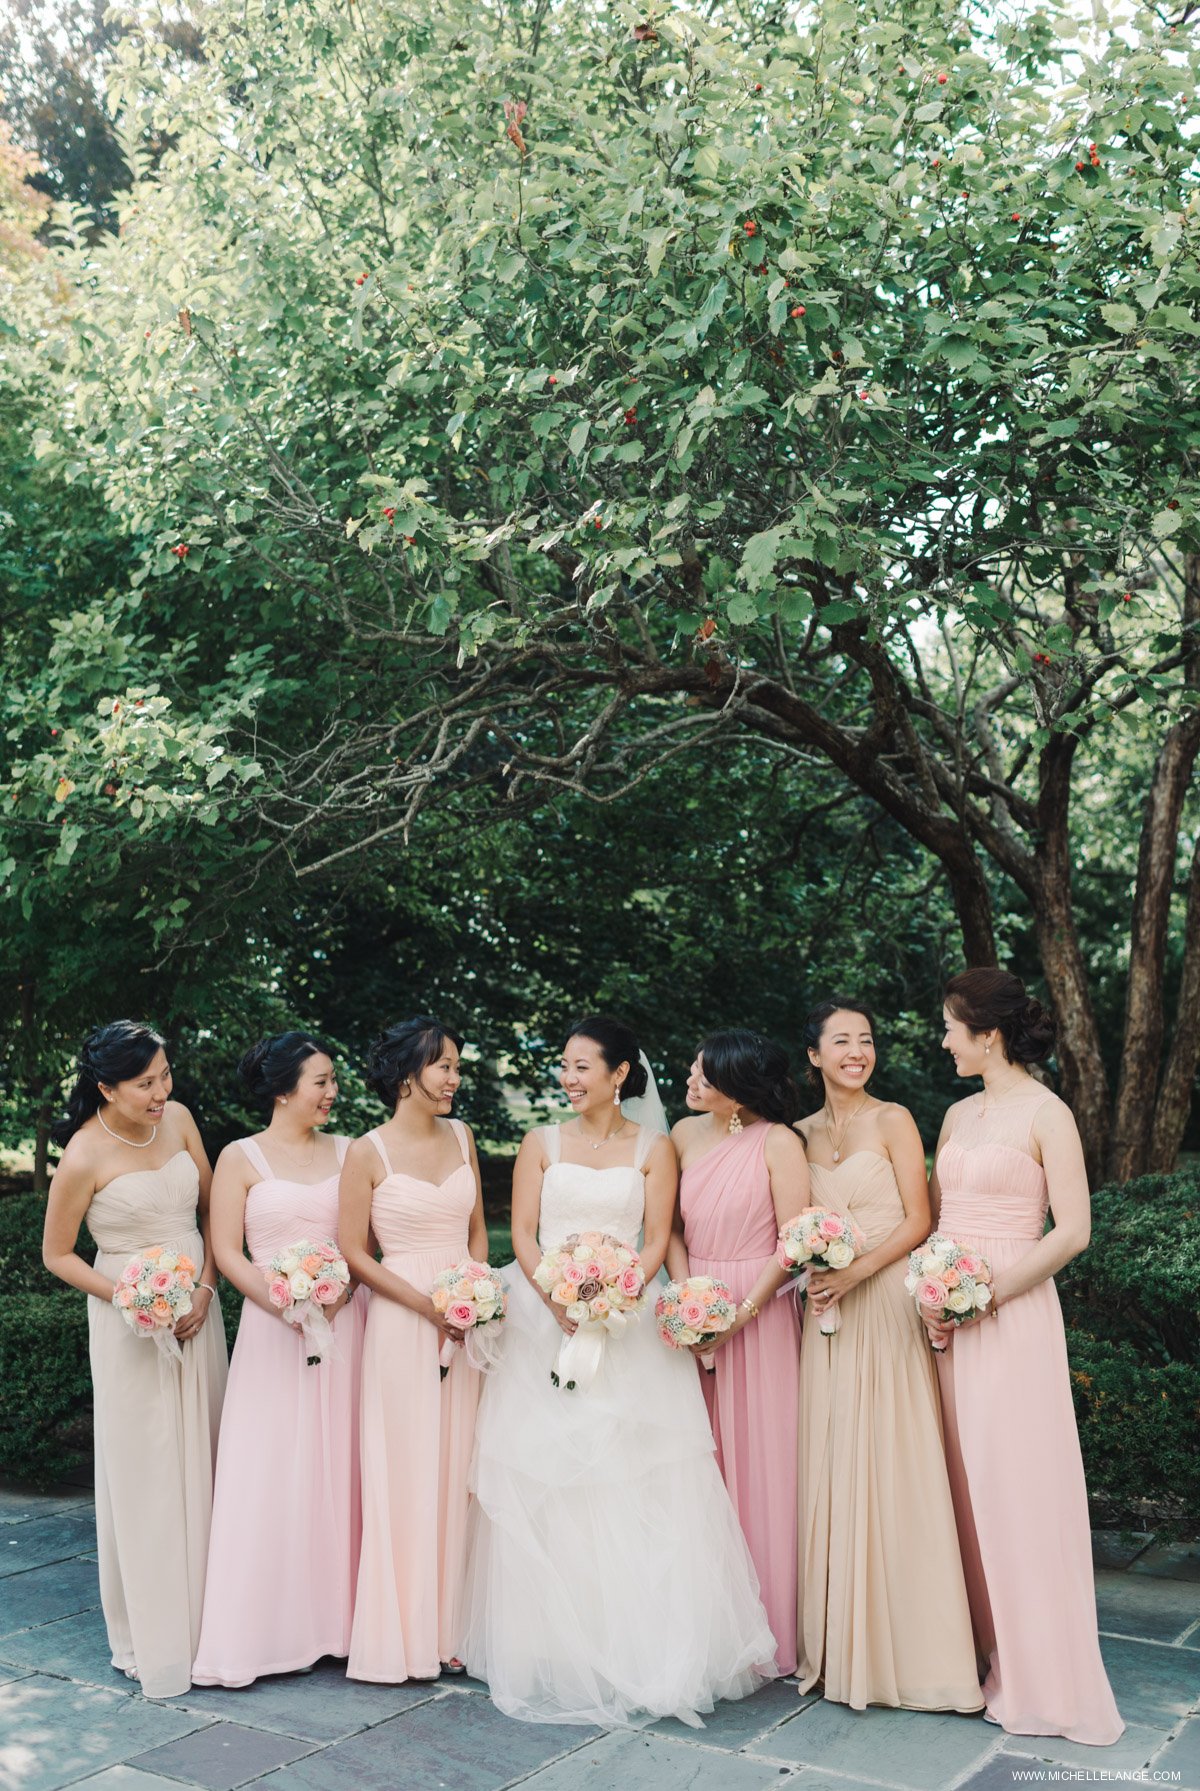 Mismatched Bridesmaids Dresses at The Carltun in Long Island